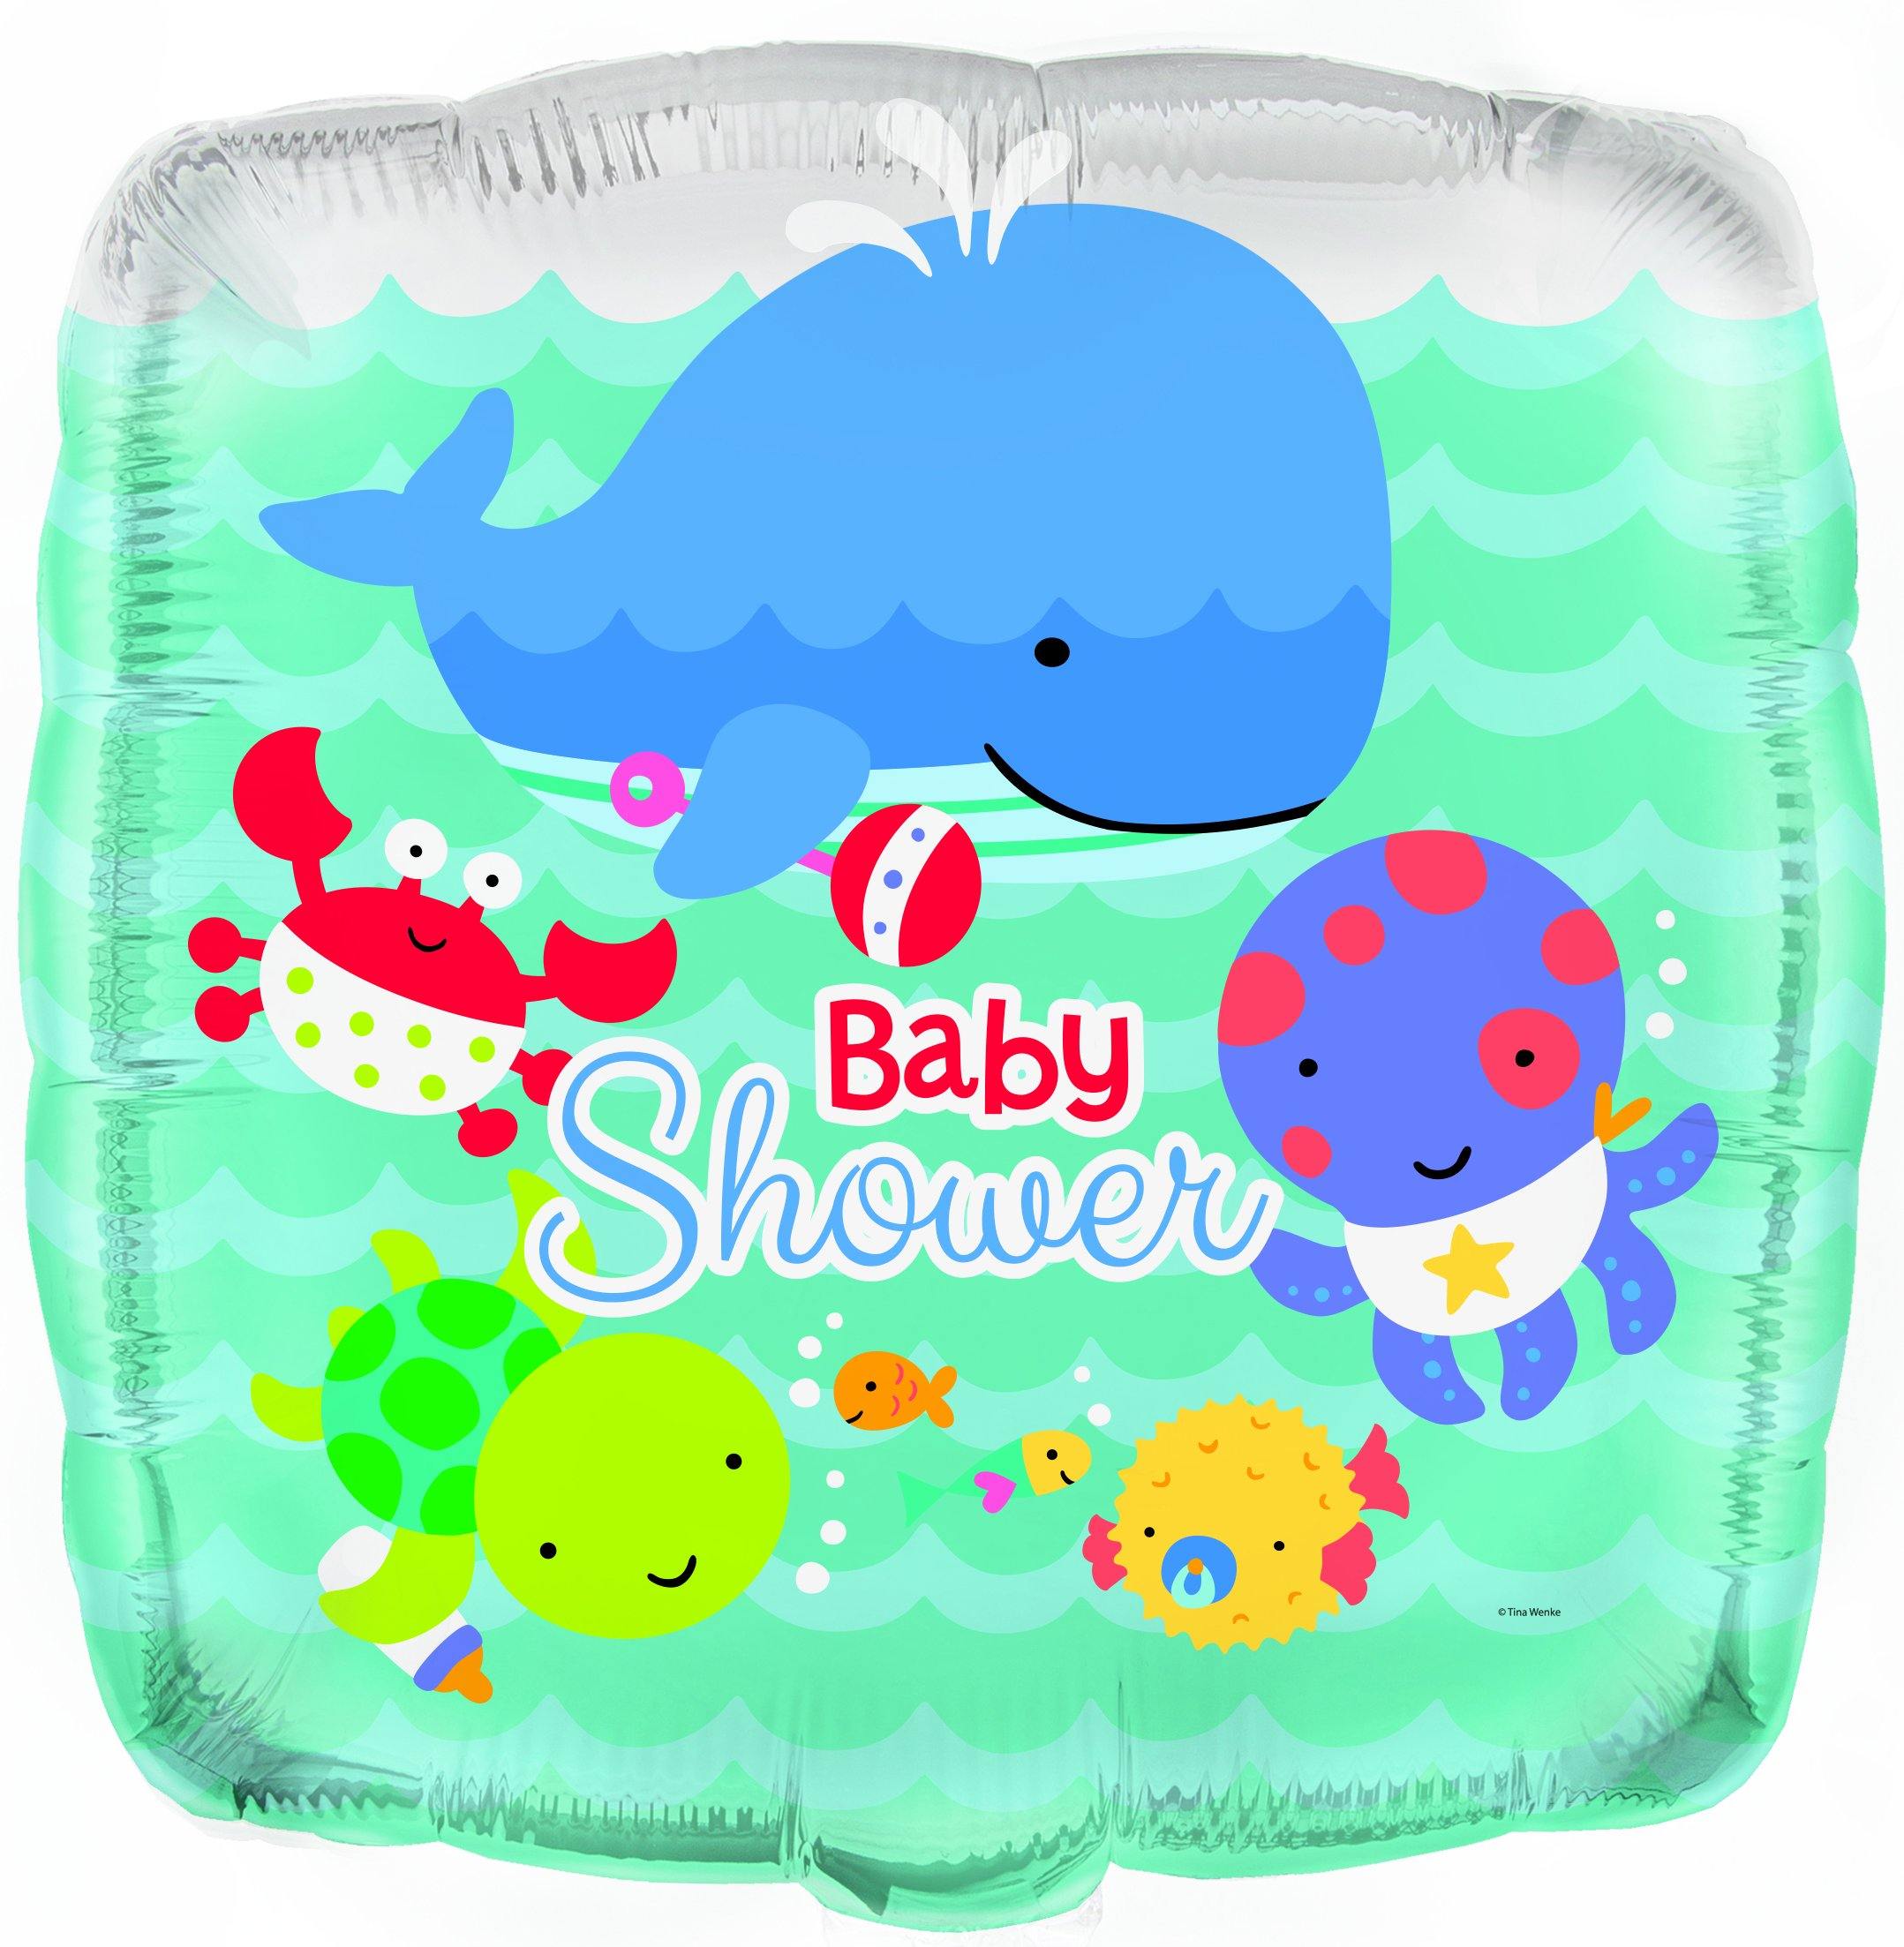 Baby Shower Under The Sea Square Foil Balloon - 45cm - The Base Warehouse